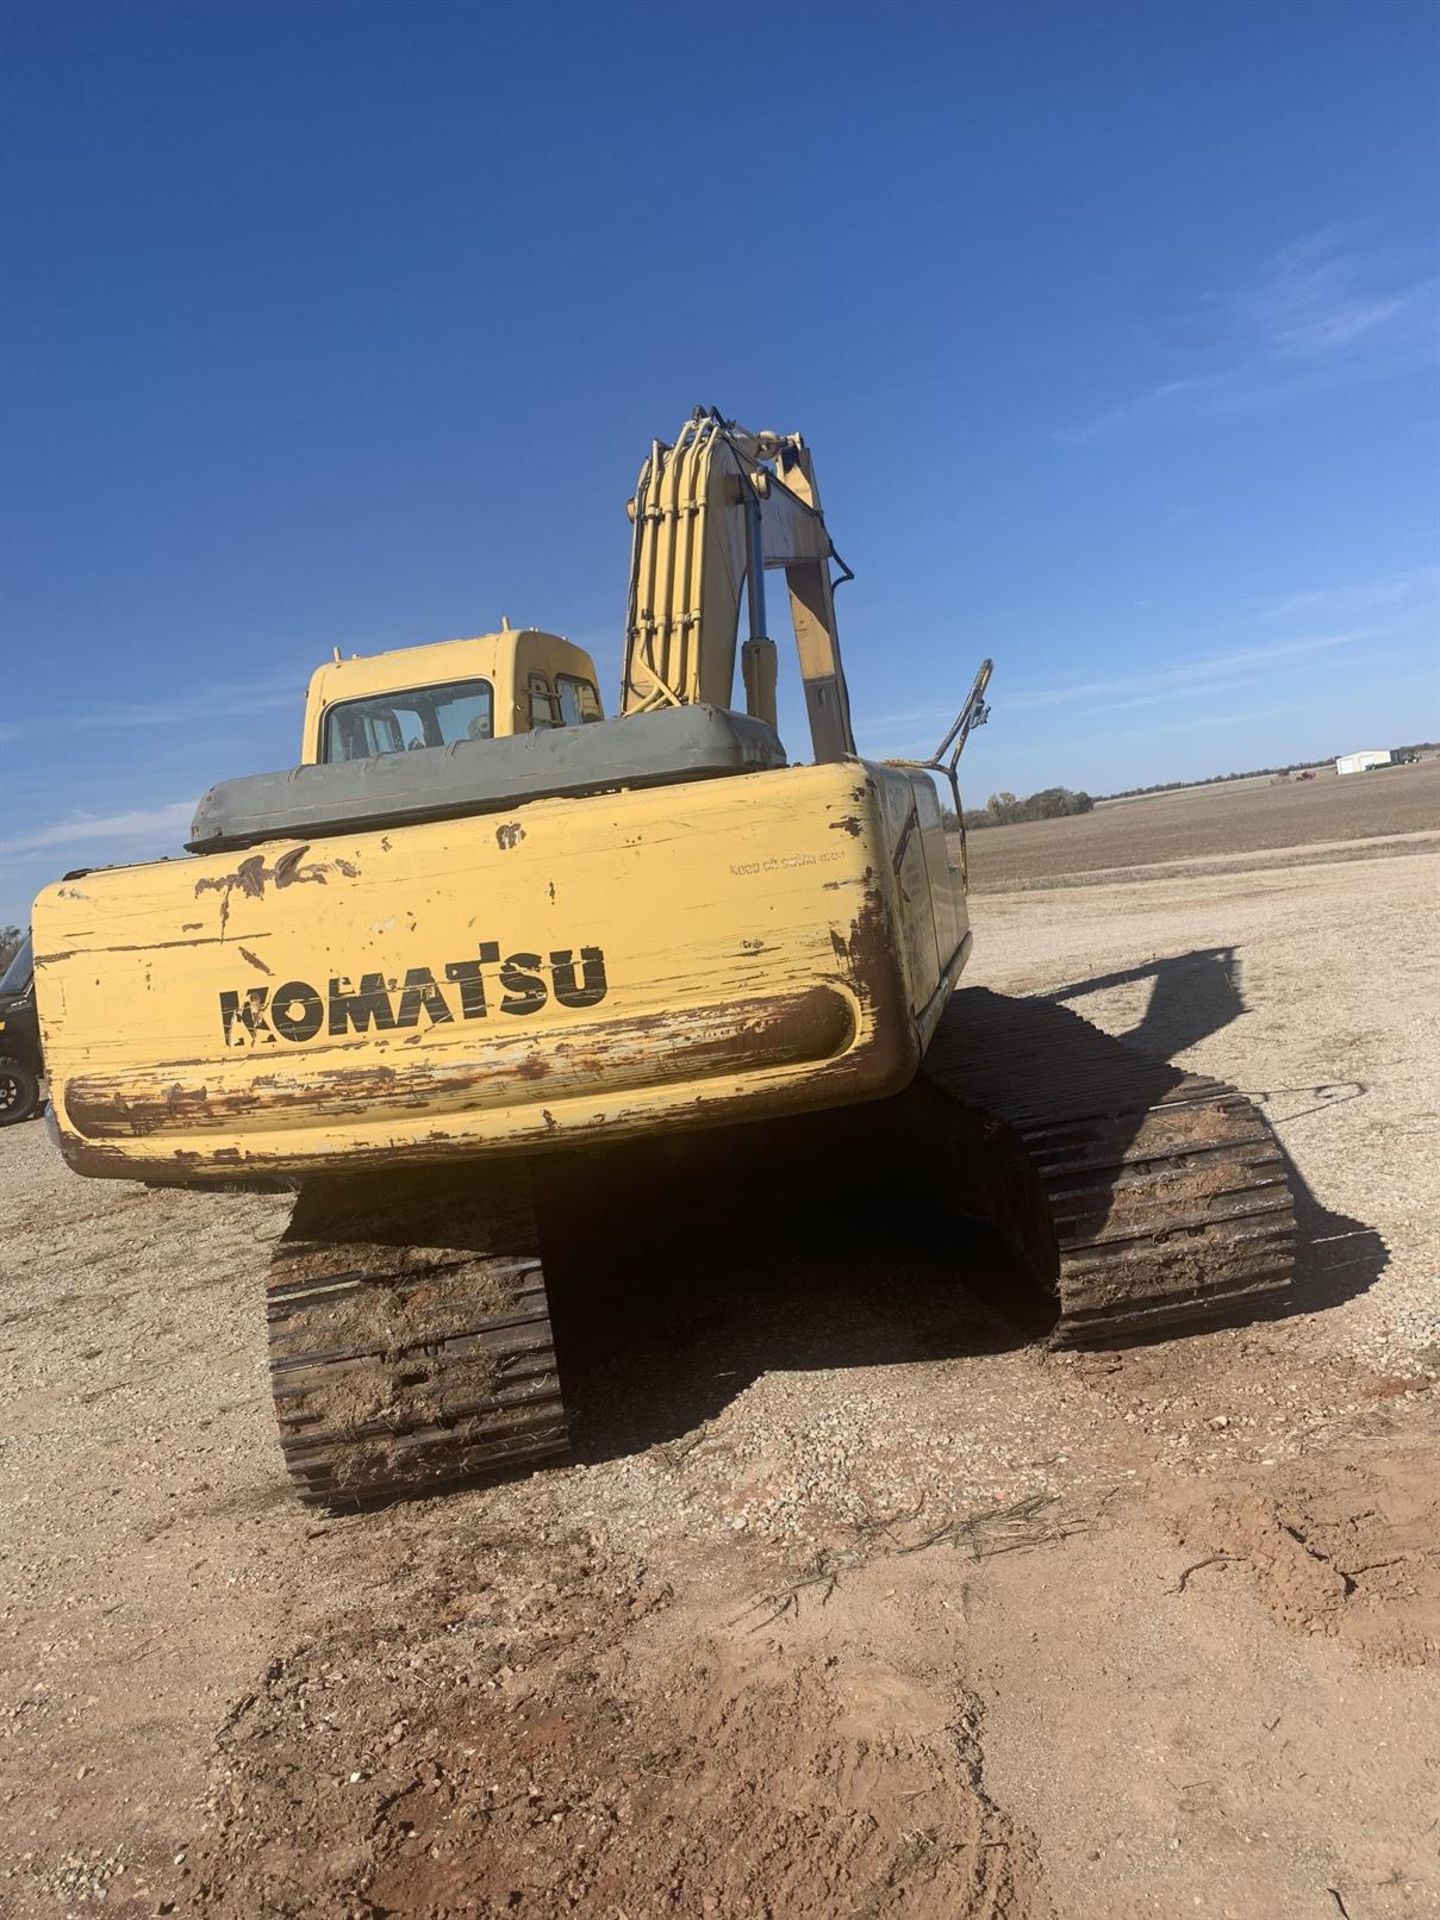 KOMATSU PC200LC-6L Excavator, s/n A80329, 9451 Hours - Image 3 of 8